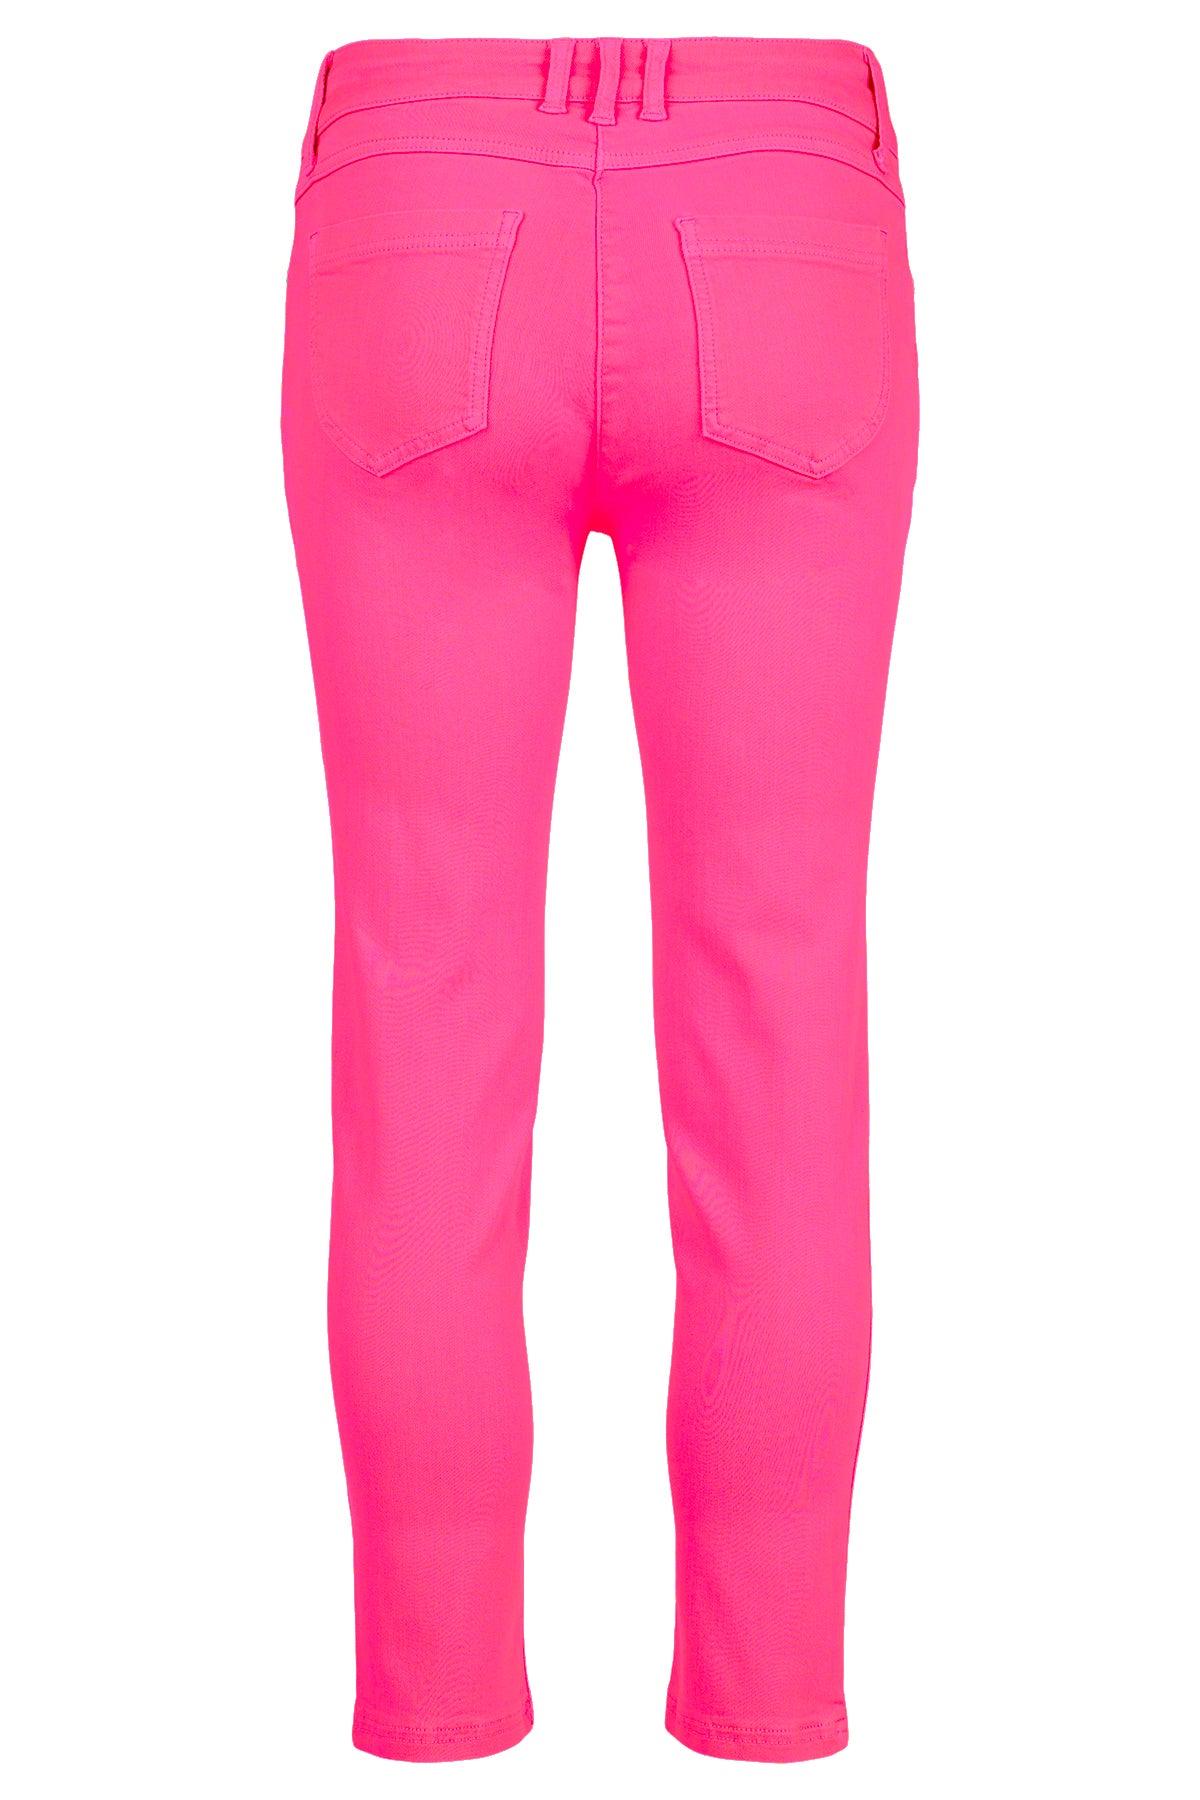 Robell Elena 09 Pink Crop Trousers